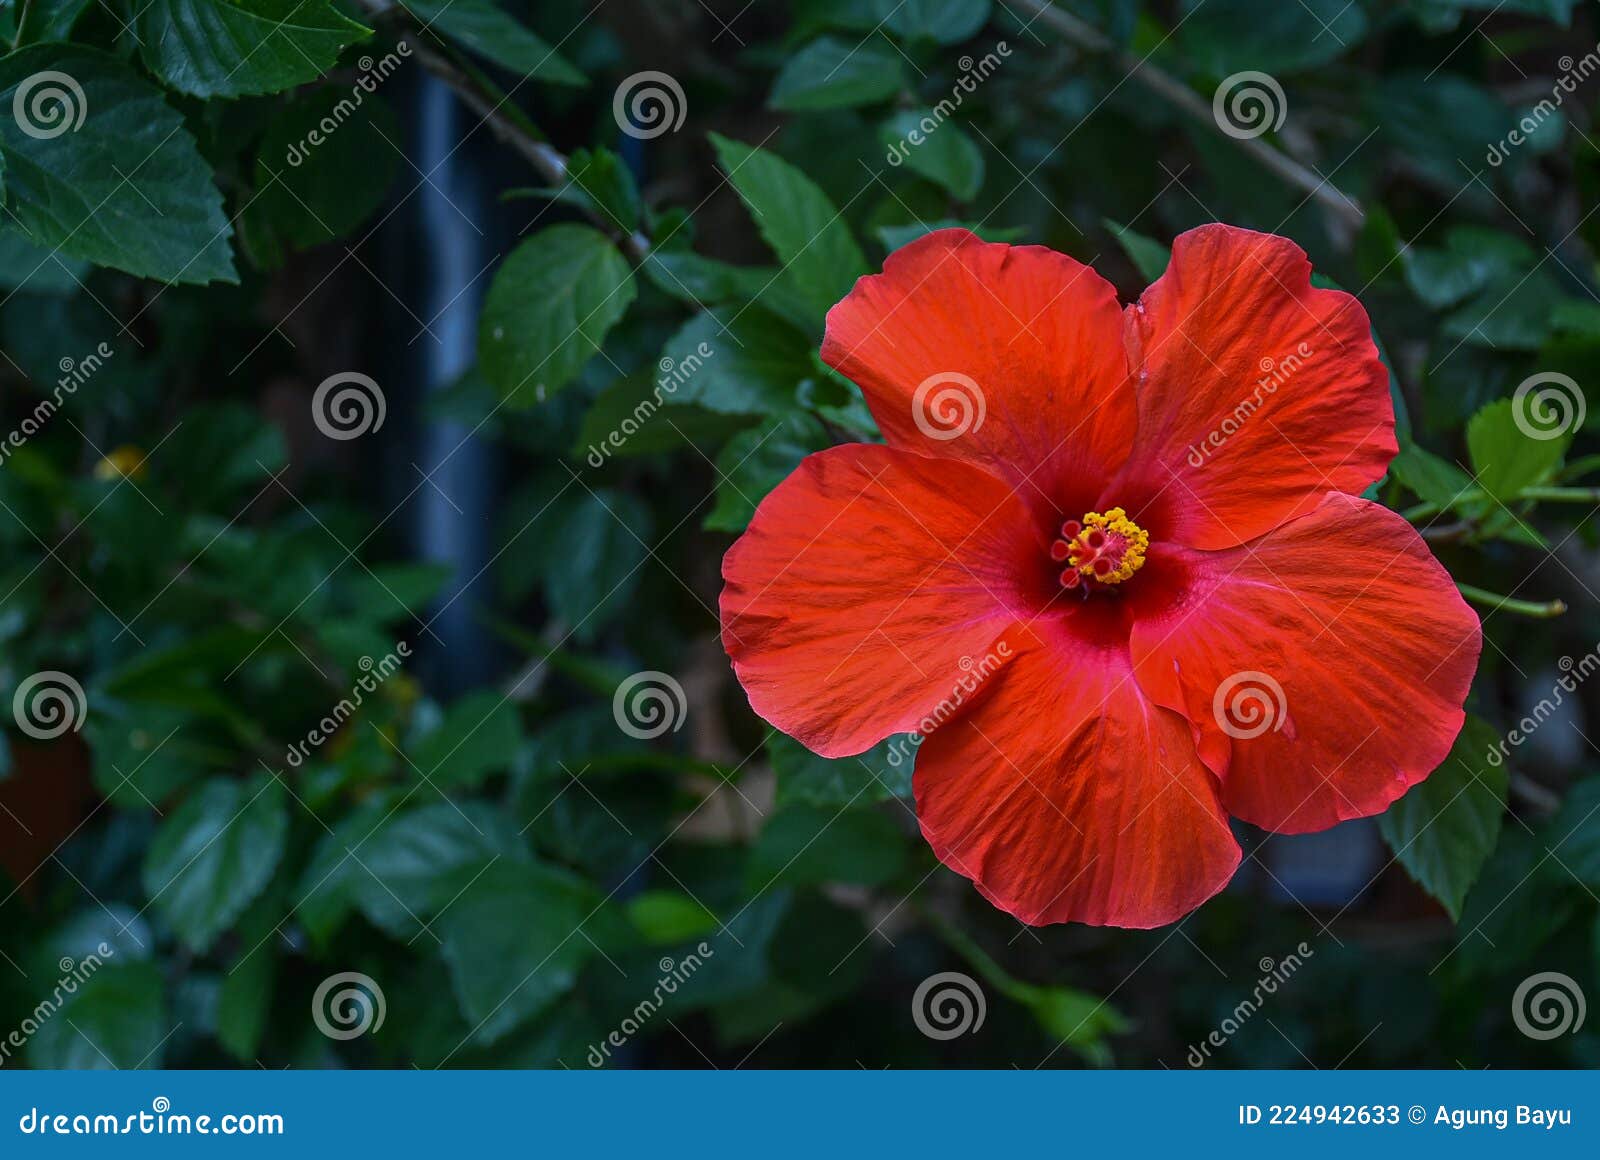 flower hibiscus (hibiscus rosa-sinensis l ) red color that grows in the yard. big flowers, red and odorless